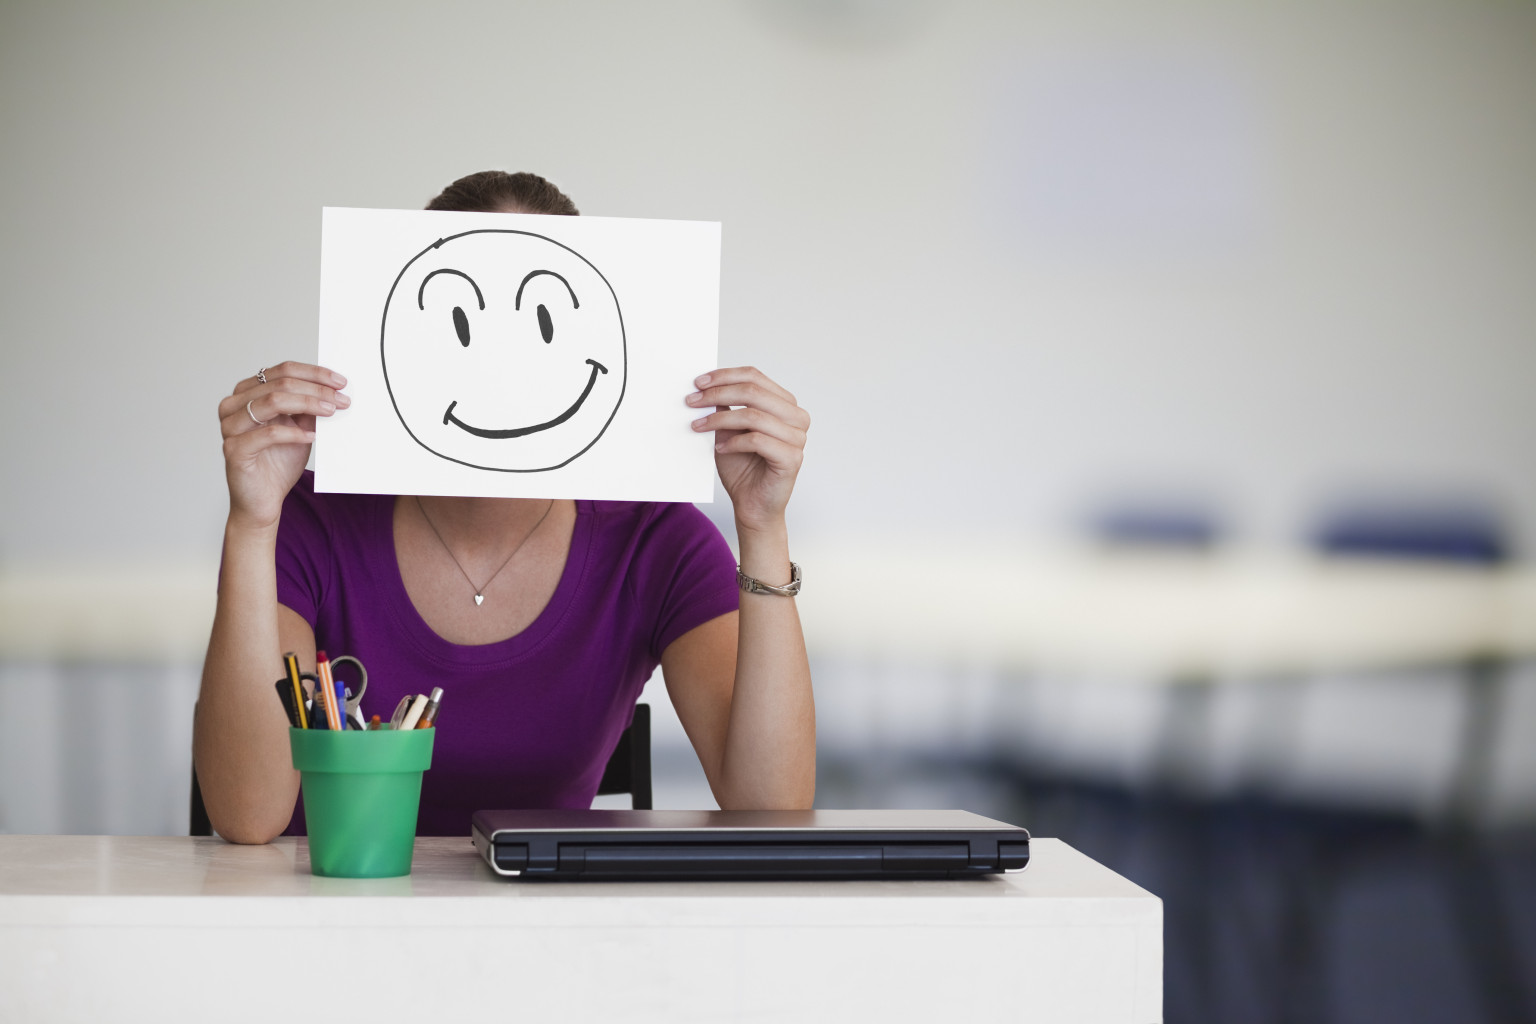 12 Ways to Become Happier at Work